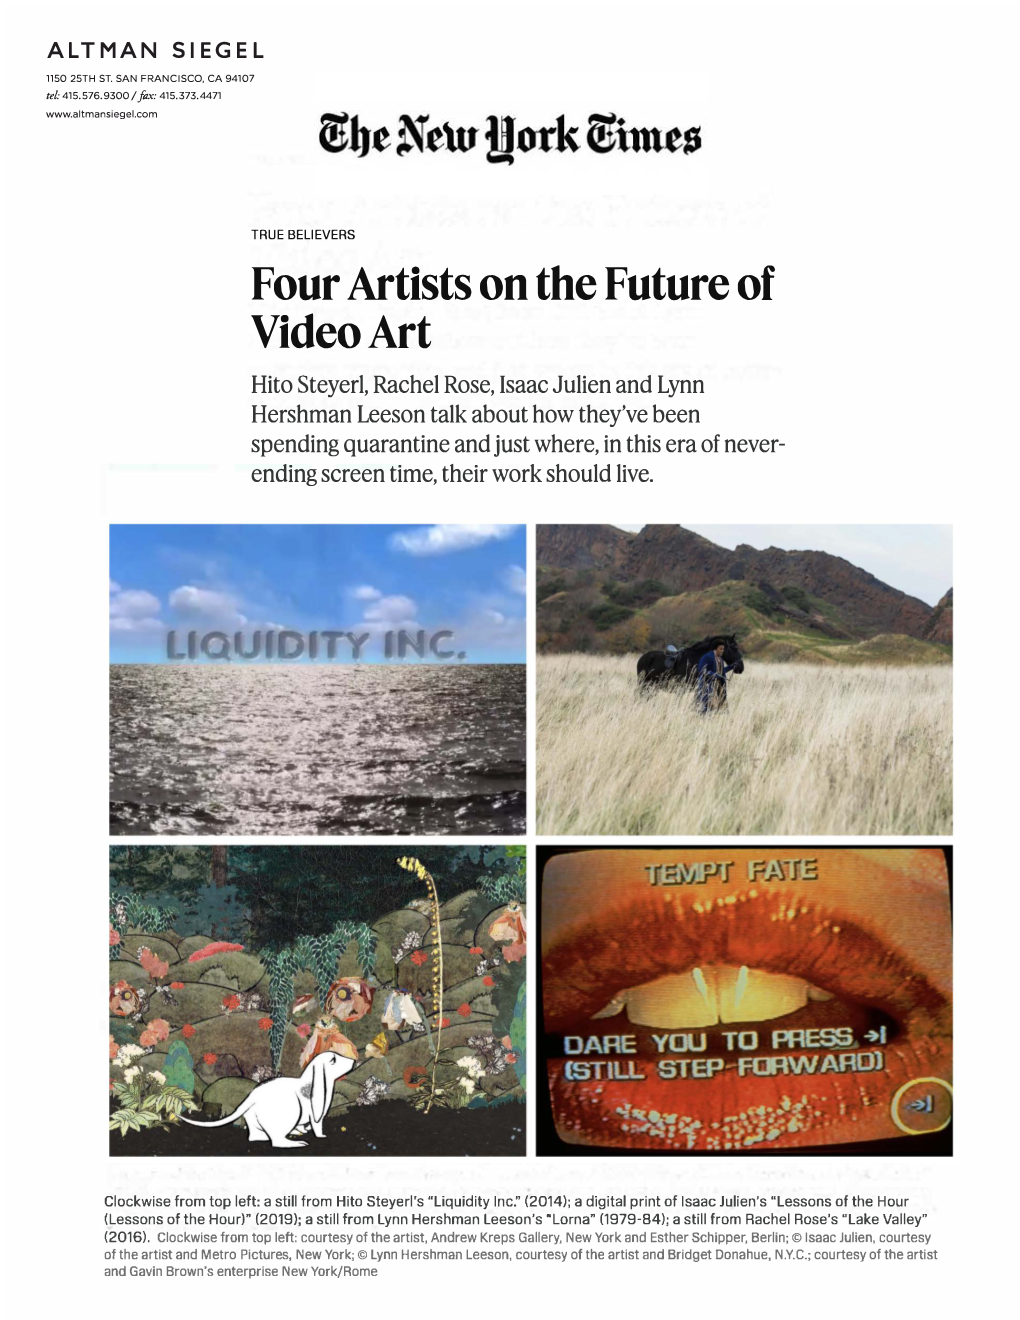 Four Artists on the Future of Video